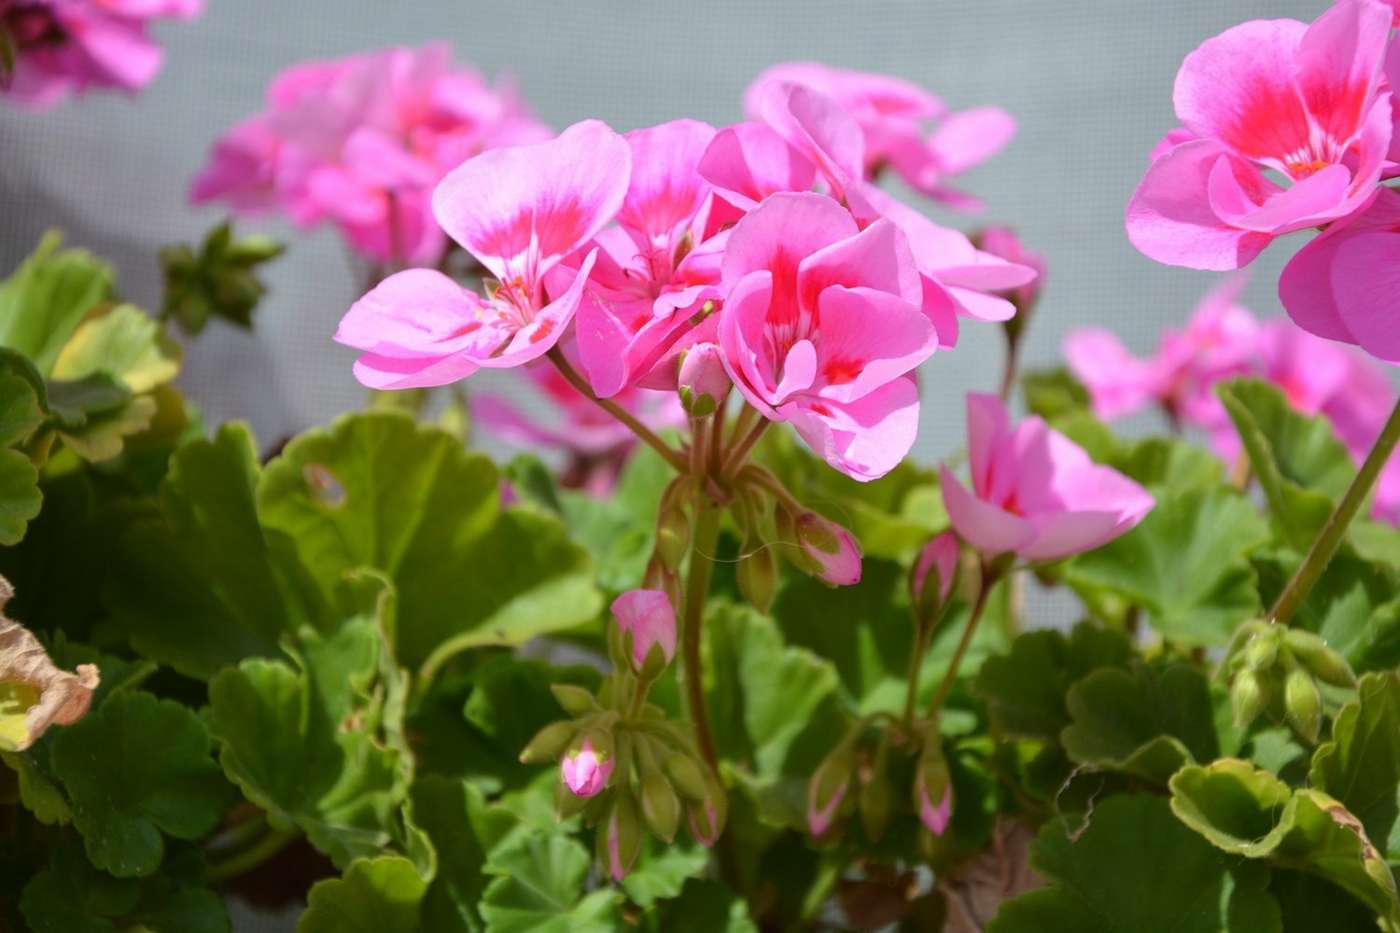 Geranie in Rosa (Pelargonium) and Rosengeranie in battle against annoying flying insects